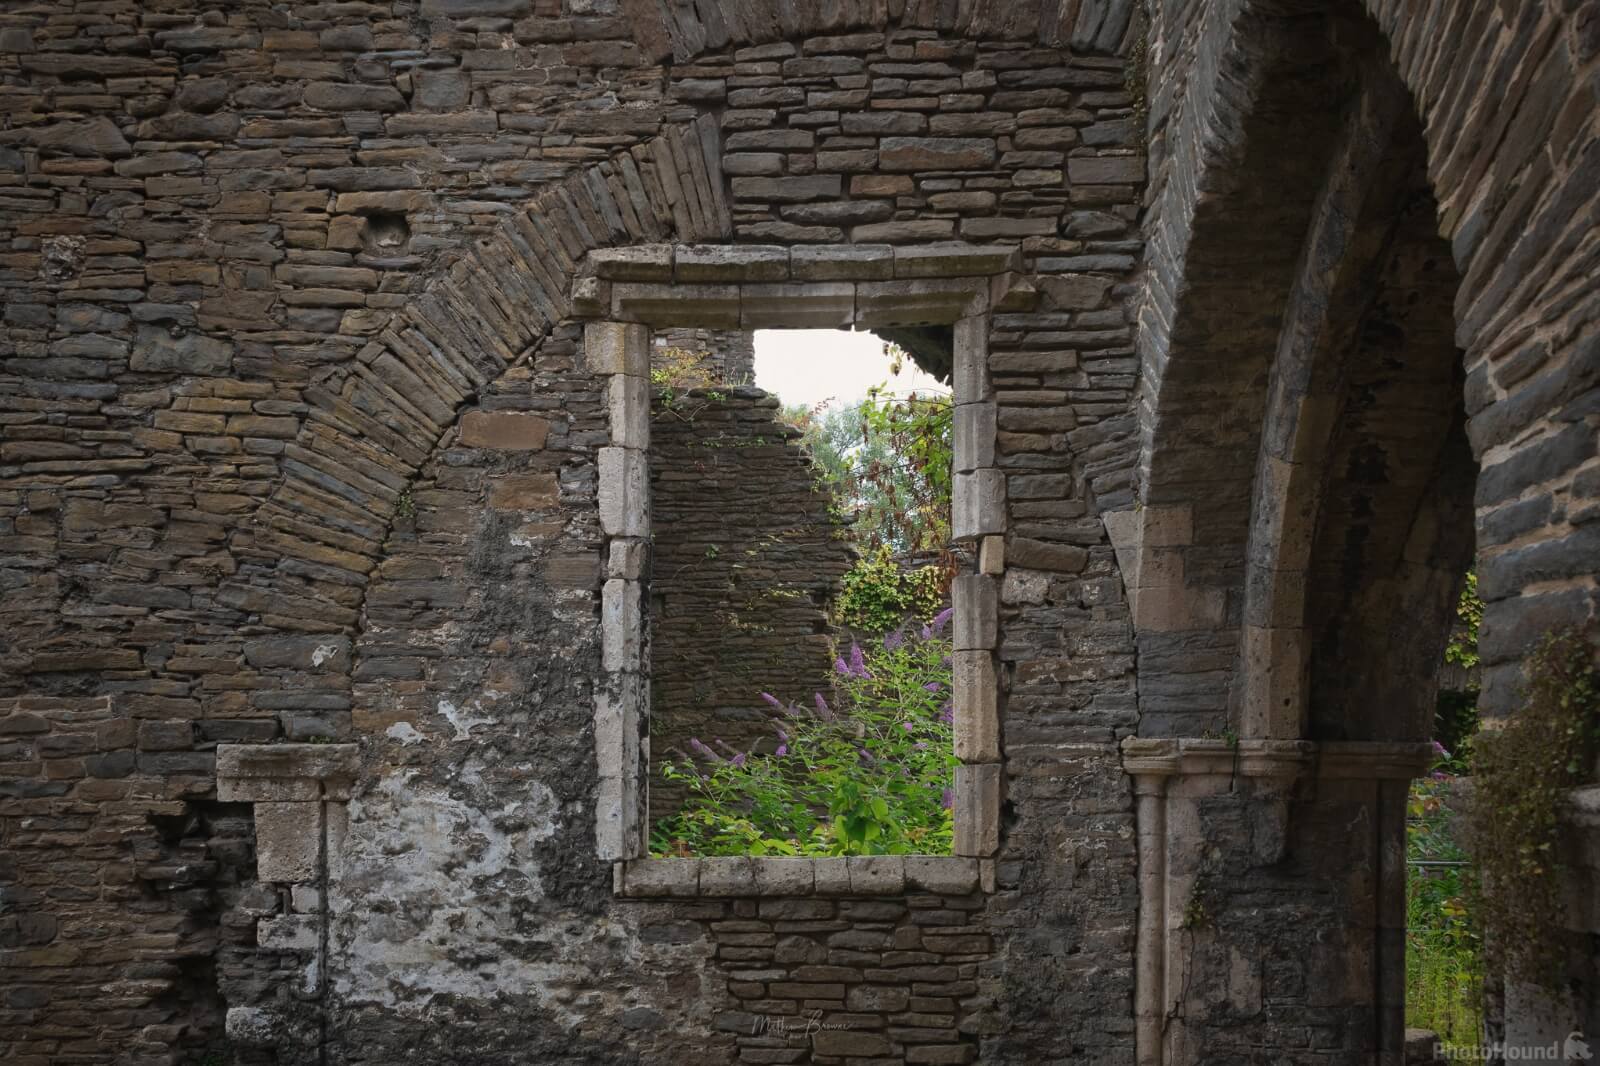 Image of Neath Abbey - Interior by Mathew Browne